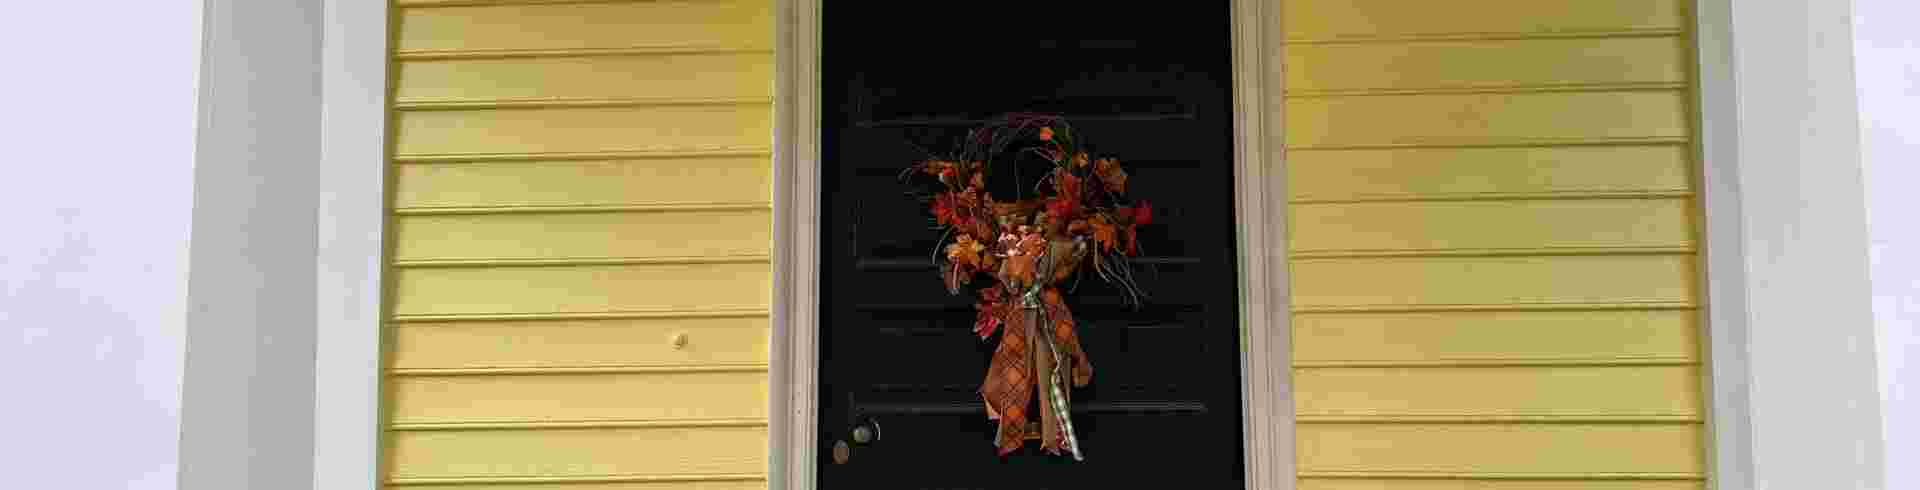 The Sunnyside Sisters Bed and Breakfast / Clarksville VA / Fall wreath - gift from Patty - we love it!!!